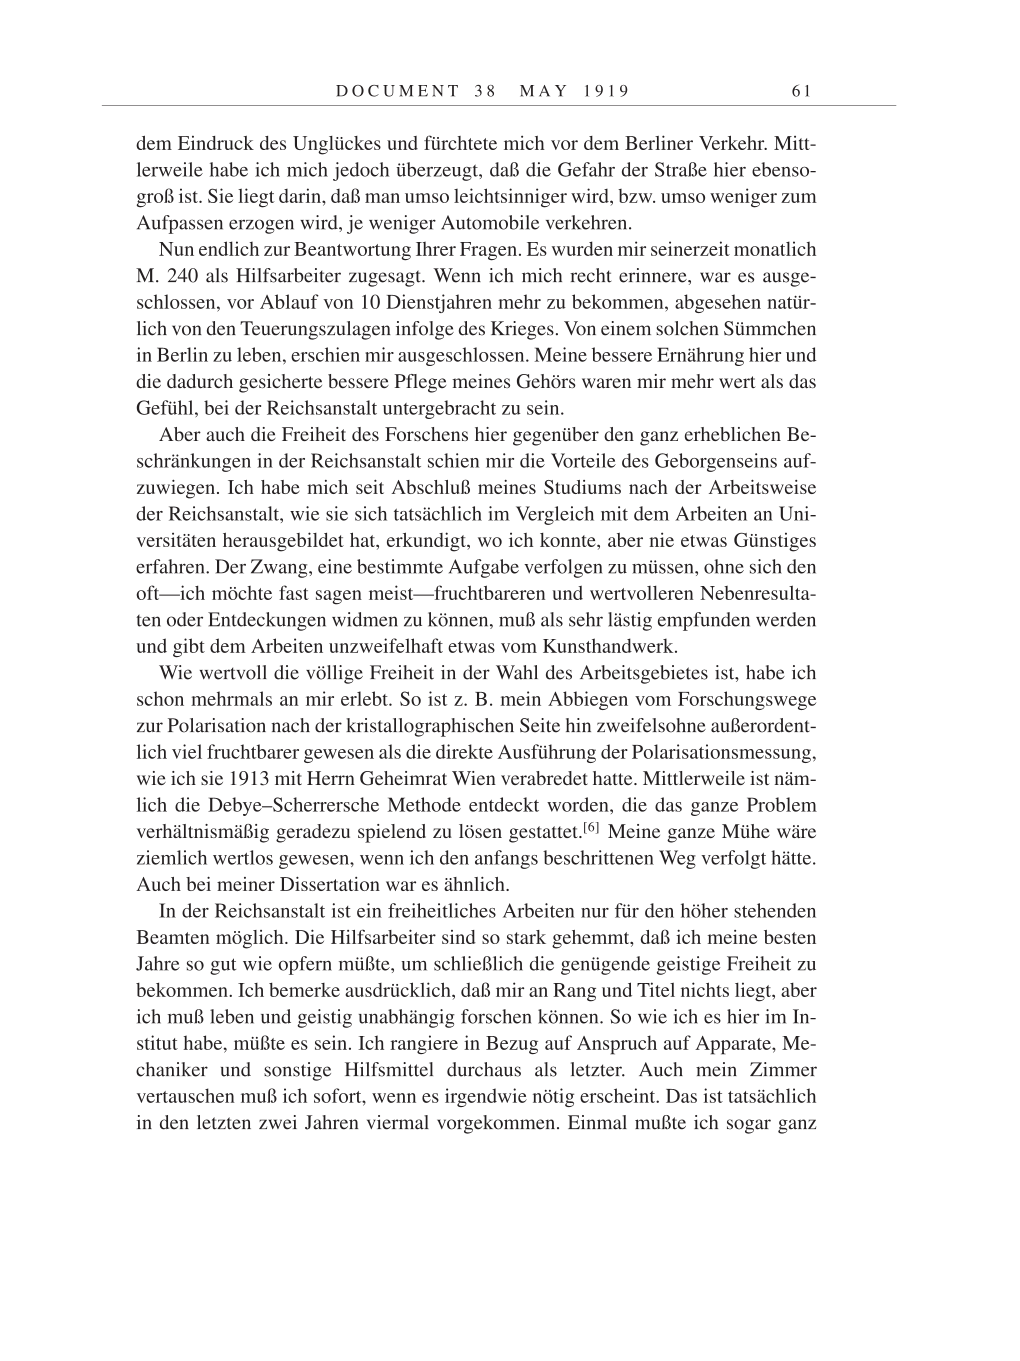 Volume 9: The Berlin Years: Correspondence January 1919-April 1920 page 61